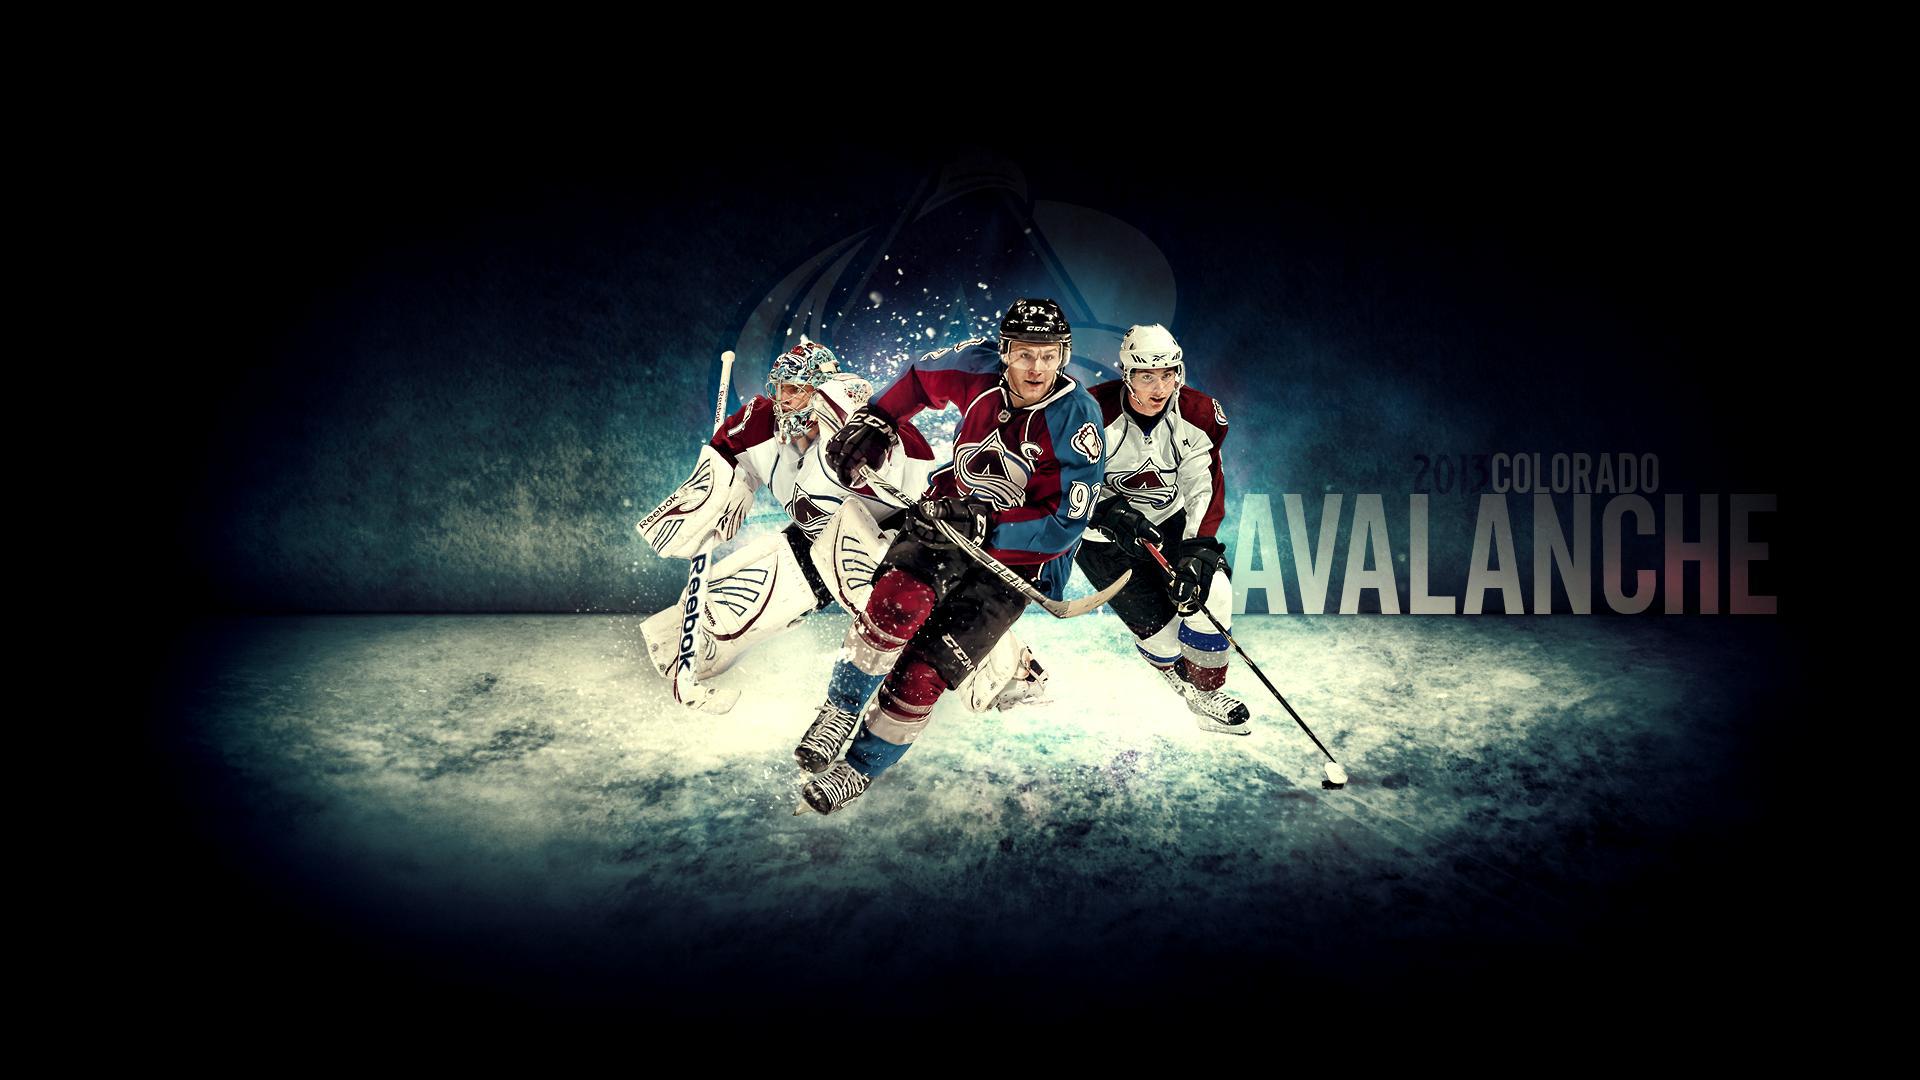 NHL player Gabriel Landeskog wallpapers and images   wallpapers 1920x1080